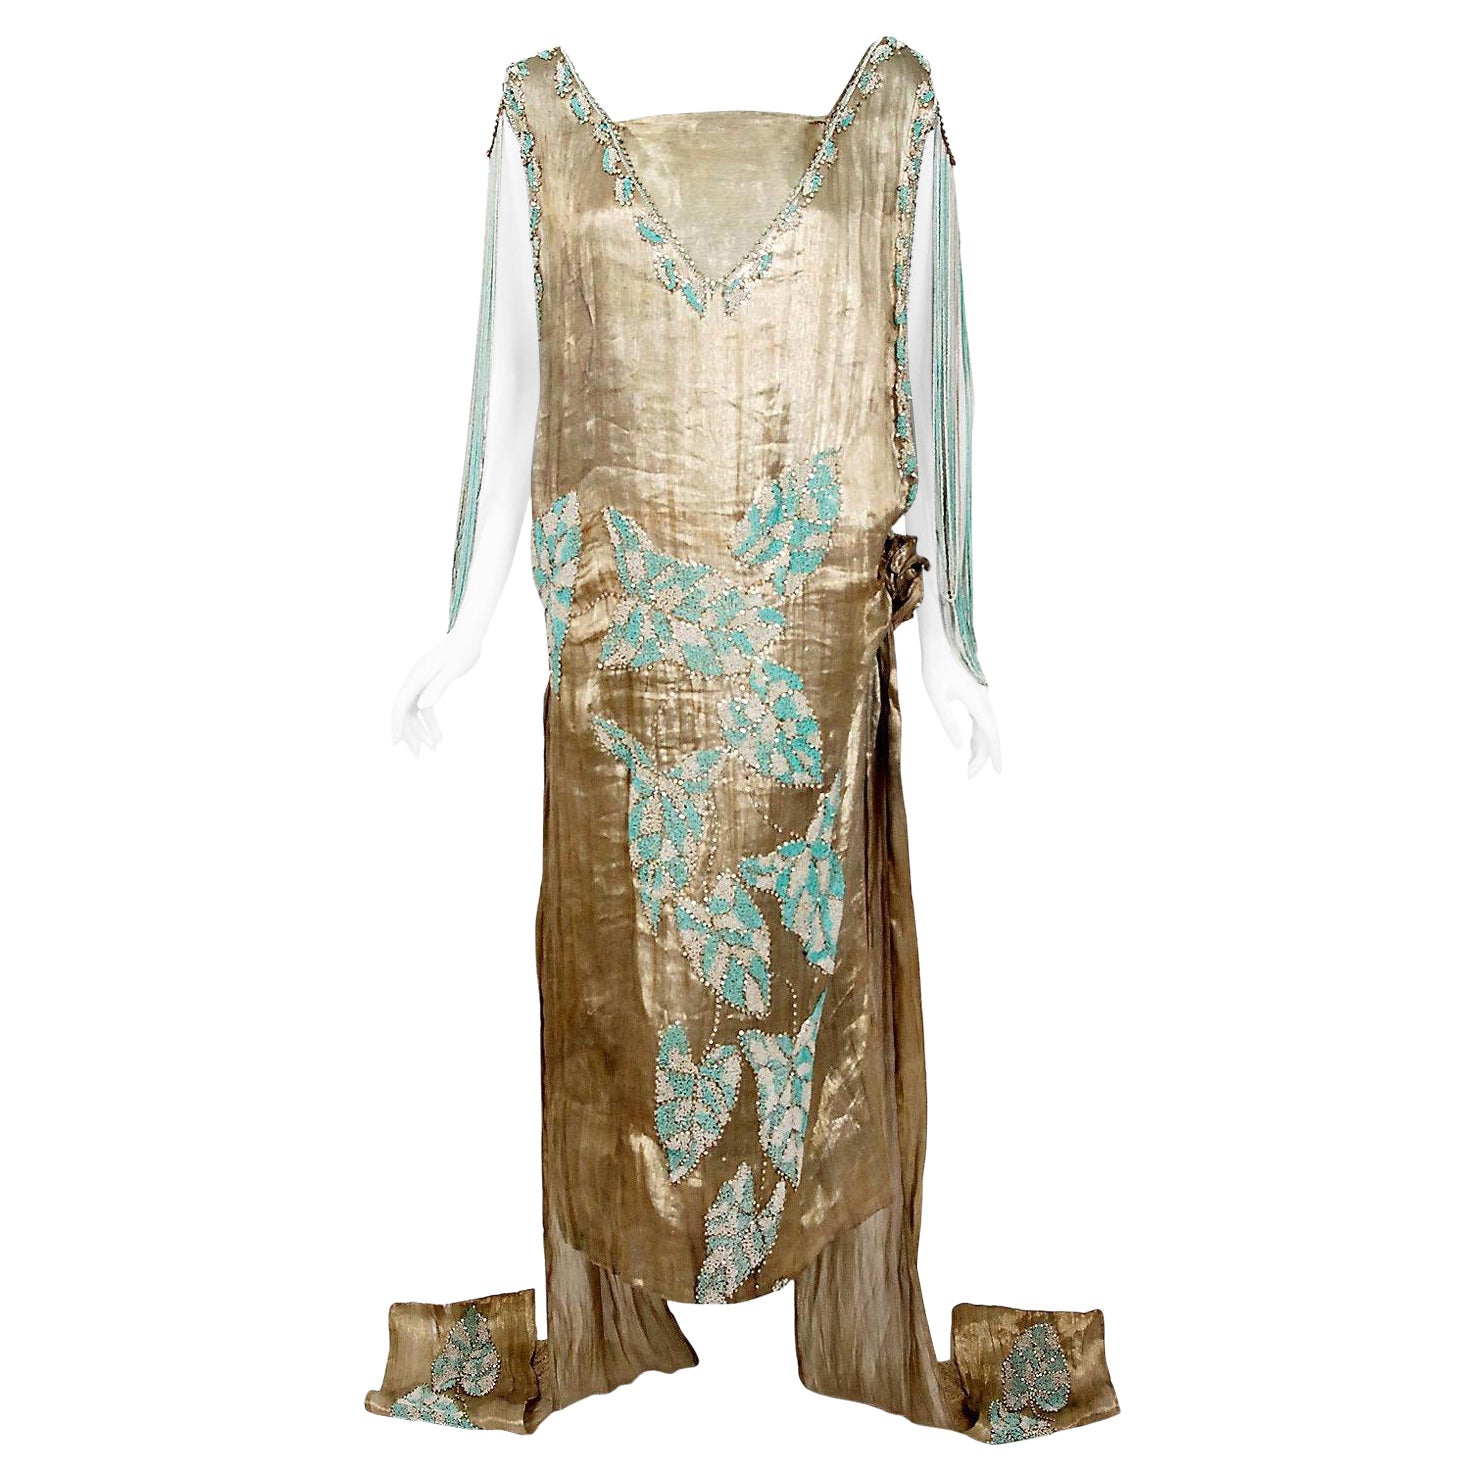 1920's French Couture Metallic Gold Lamé Beaded Leaf-Motif Trained Flapper Dress